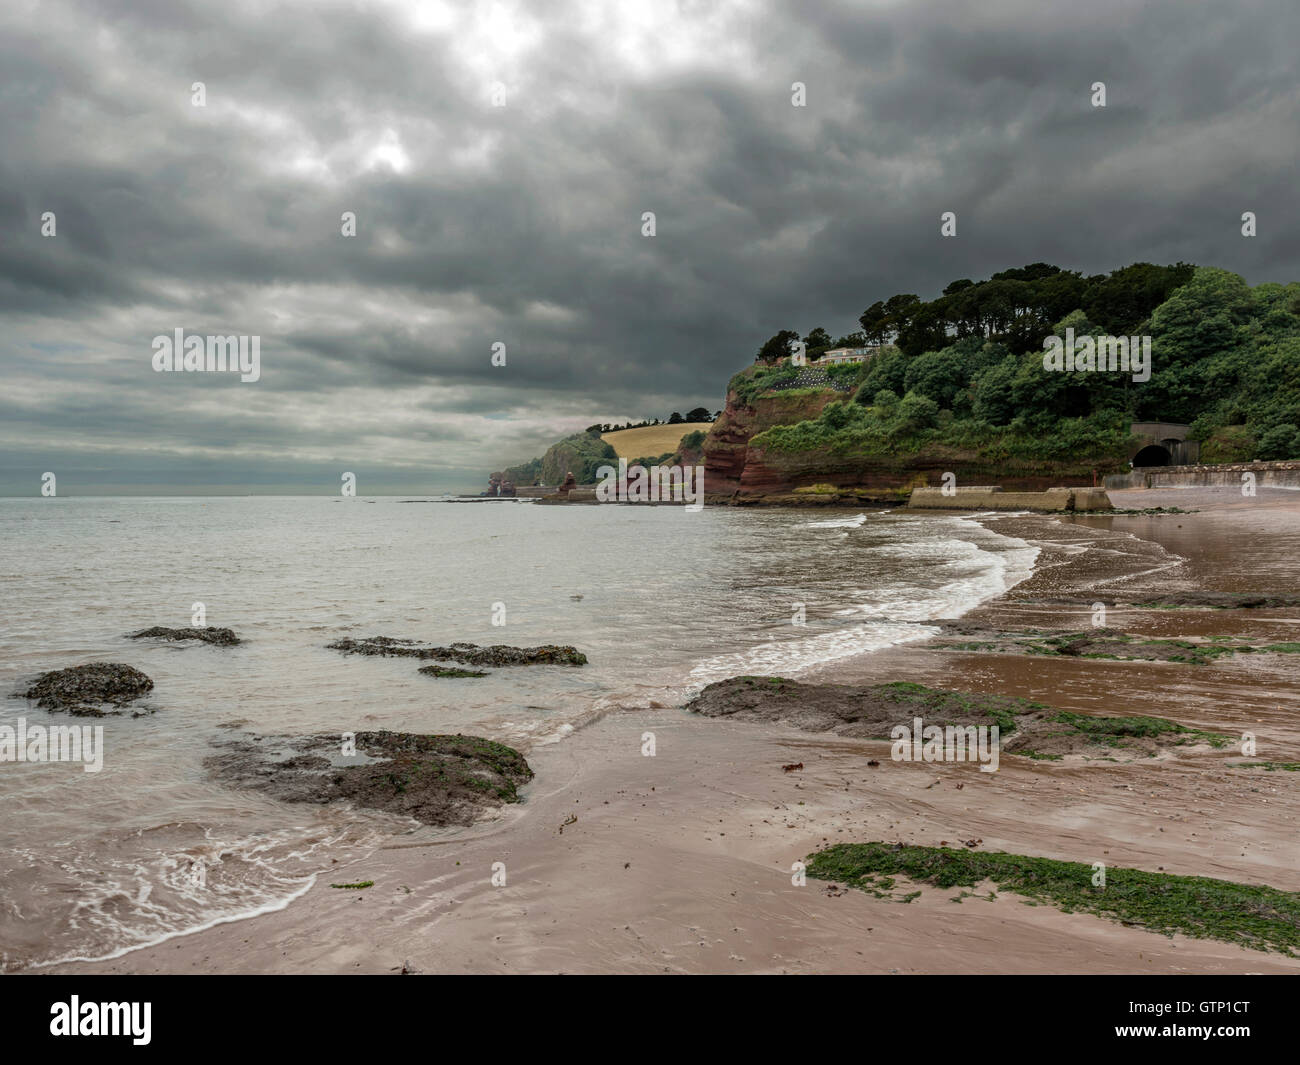 Beautiful landscape depicting storm clouds casting shadows over the South West Coastal Path / beach at Dawlish, Devon. Stock Photo